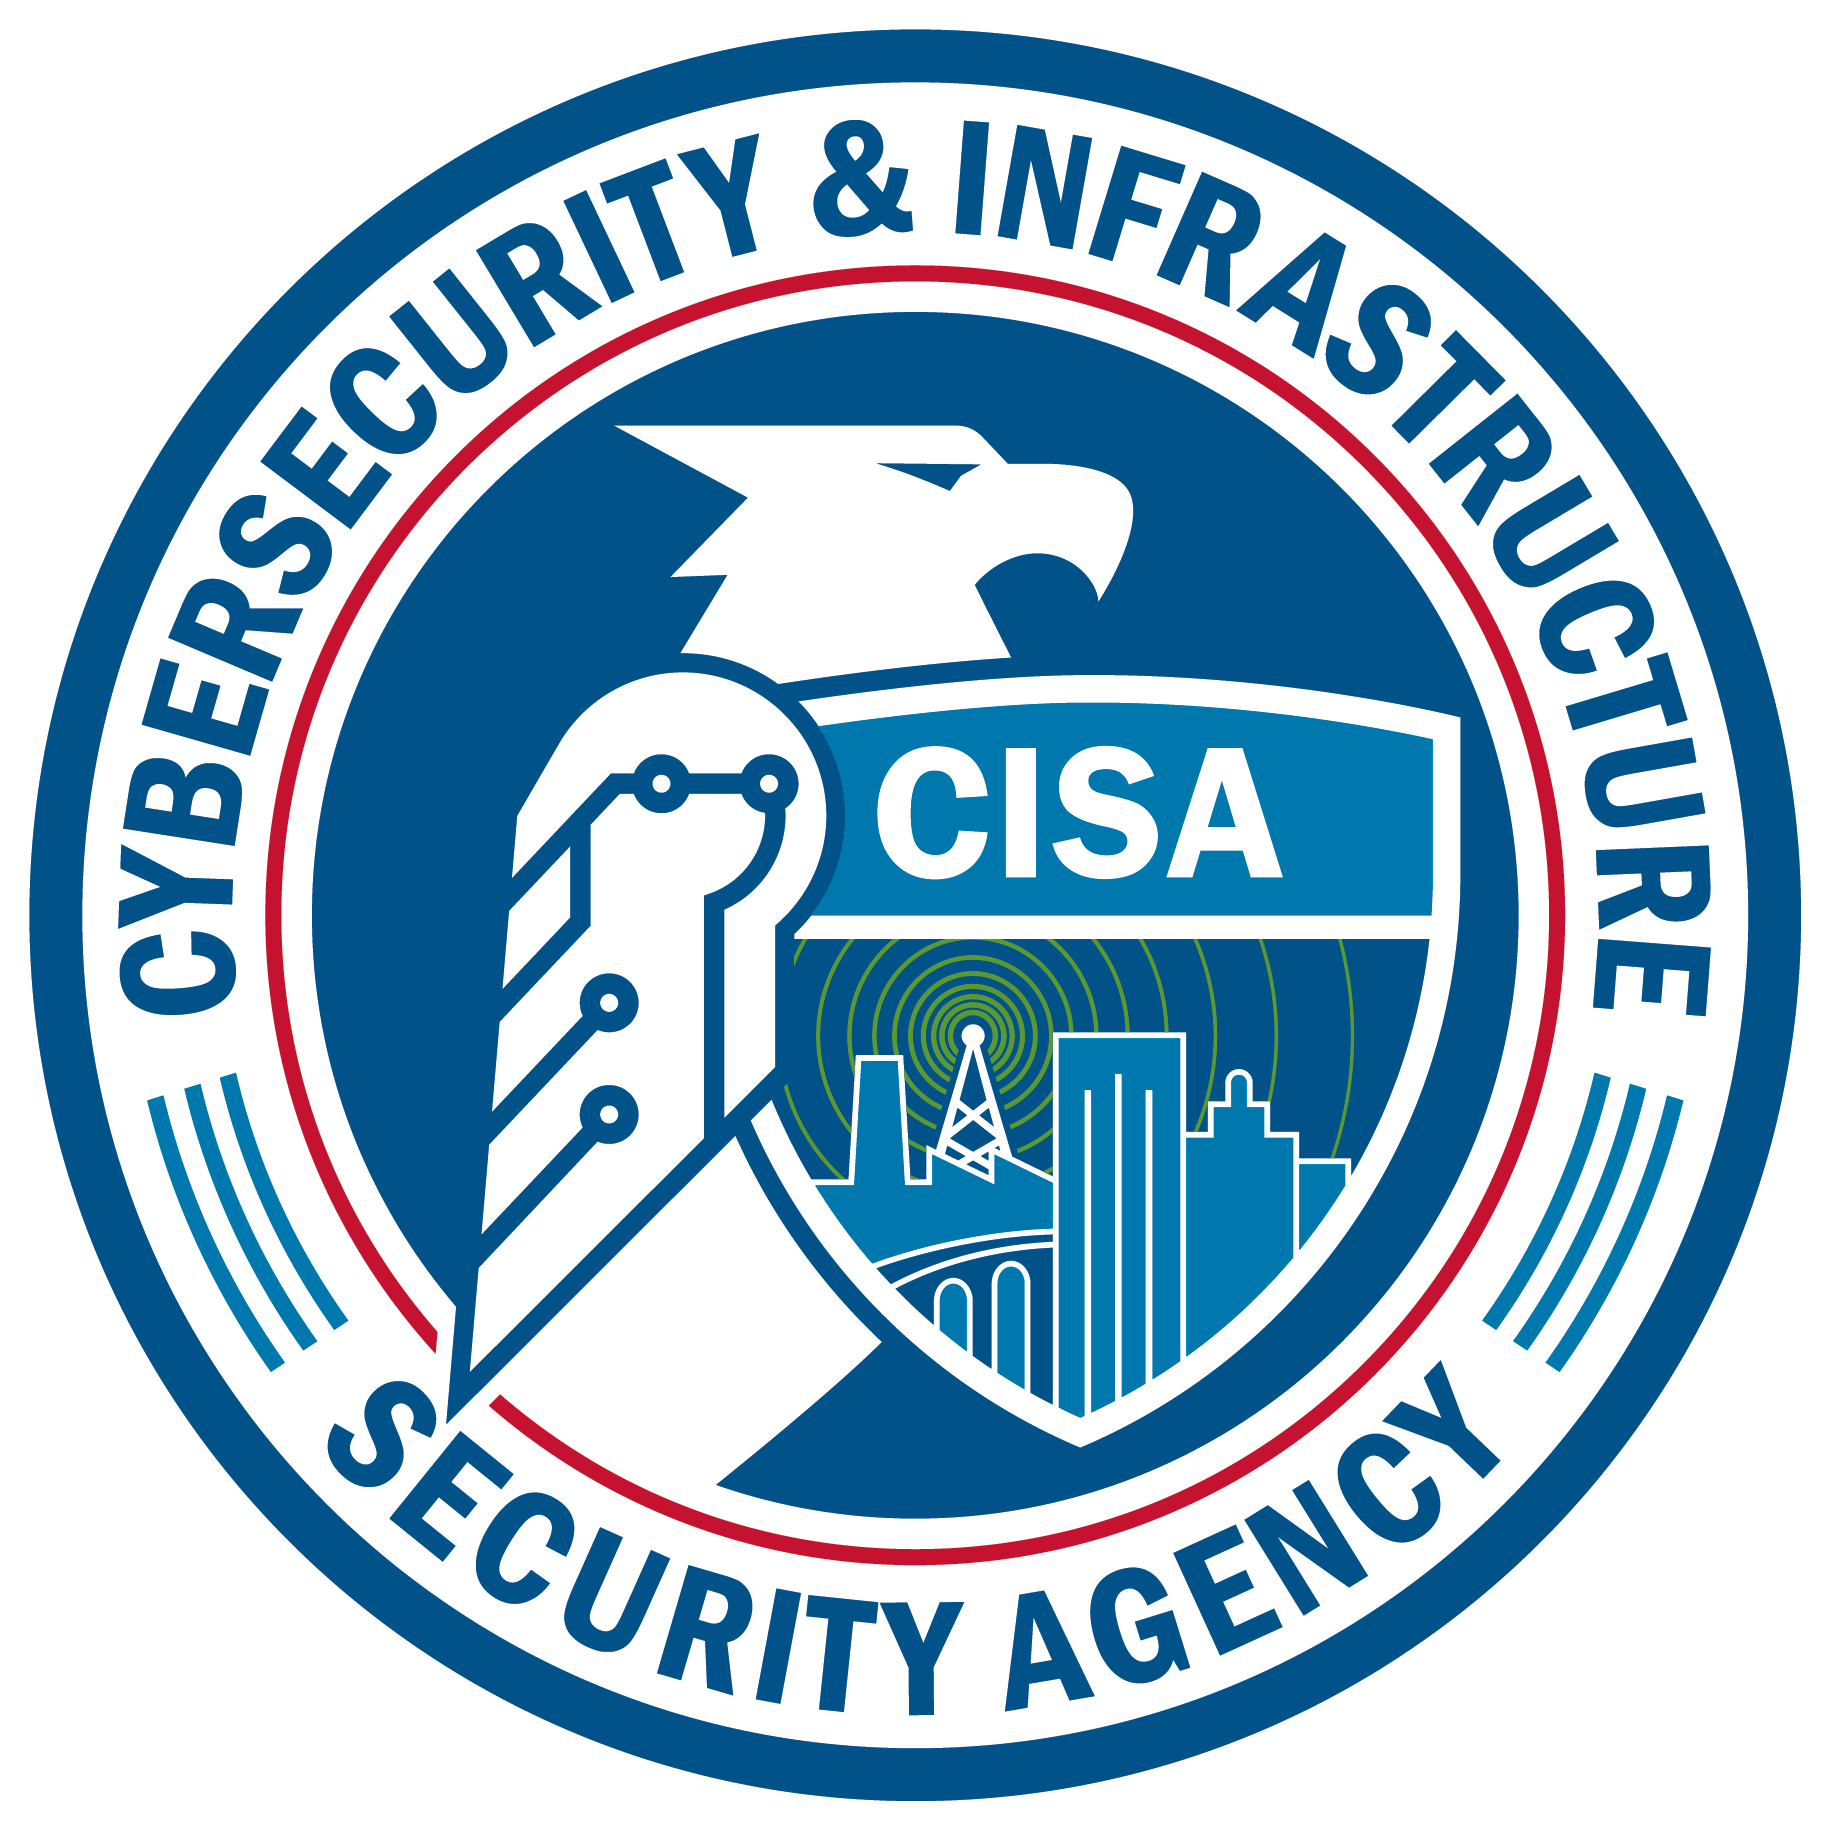 •	The blue outer ring and the inner red ring indicate CISA’s unity with DHS and a nod to our efforts to cut through government red tape, while the three blue lines in the outer ring represent the Agency’s three congressionally mandated missions: cybersecurity, infrastructure security, and emergency communications.    •	The eagle faces to the right, signifying CISA’s keen eye on the future and forward posture.    •	The center shield represents CISA’s commitment to “Defend Today, Secure Tomorrow,” while the eagle’s folded wings reinforce CISA’s protection and defense of our nation.    •	The image includes wavelengths representing the emergency communications mission, which emanate from buildings that signify the infrastructure security mission, while the nodes in the eagle’s arm indicate the cybersecurity mission.   •	The bridge represents the vital, two-way connection, communication, and collaboration between the public and private sectors, which is so key to CISA’s mission success.  